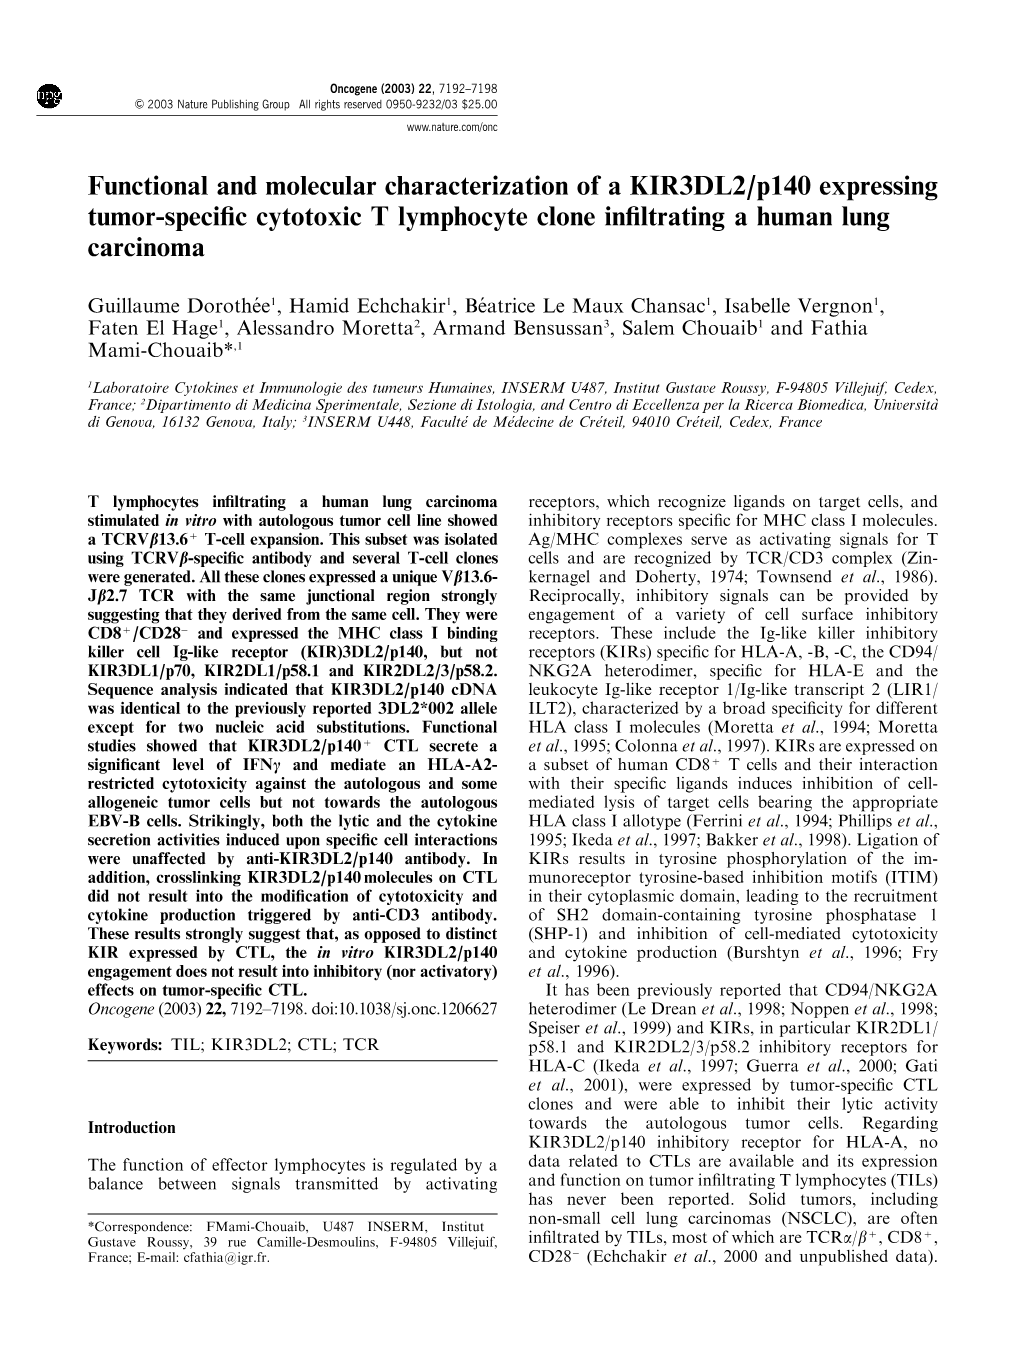 Functional and Molecular Characterization of a KIR3DL2/P140 Expressing Tumor-Specific Cytotoxic T Lymphocyte Clone Infiltrating a Human Lung Carcinoma